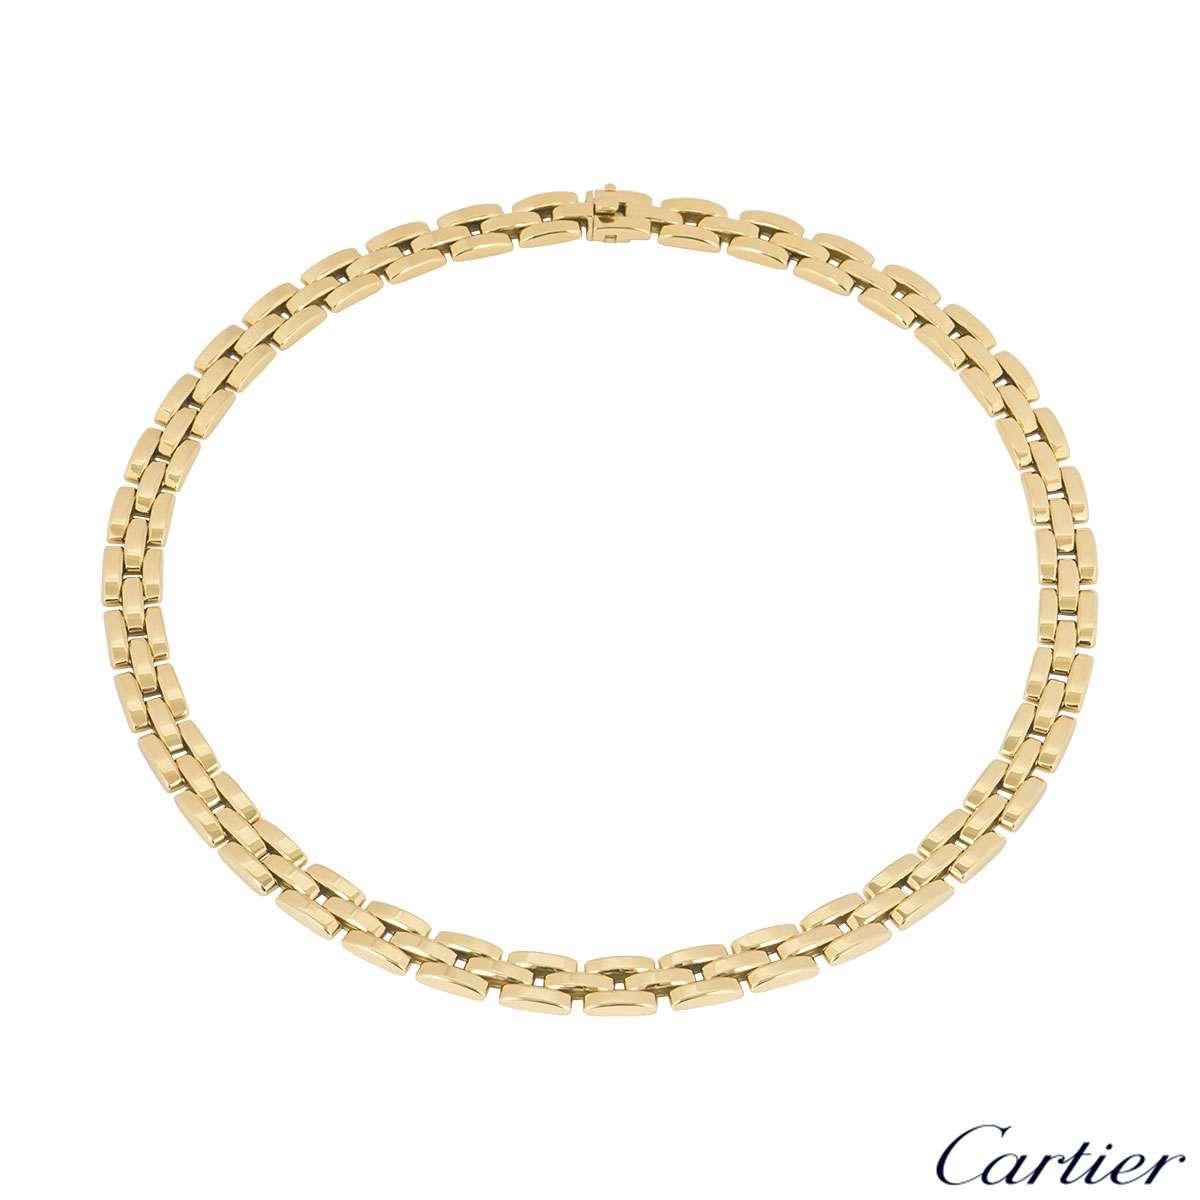 A simple 18k yellow gold Cartier necklace from the Panthere Maillon collection. The necklace comprises of 39 classic Cartier flat solid links placed like brickwork. The necklace measures 16.5 inches in length and features a box clasp with a push